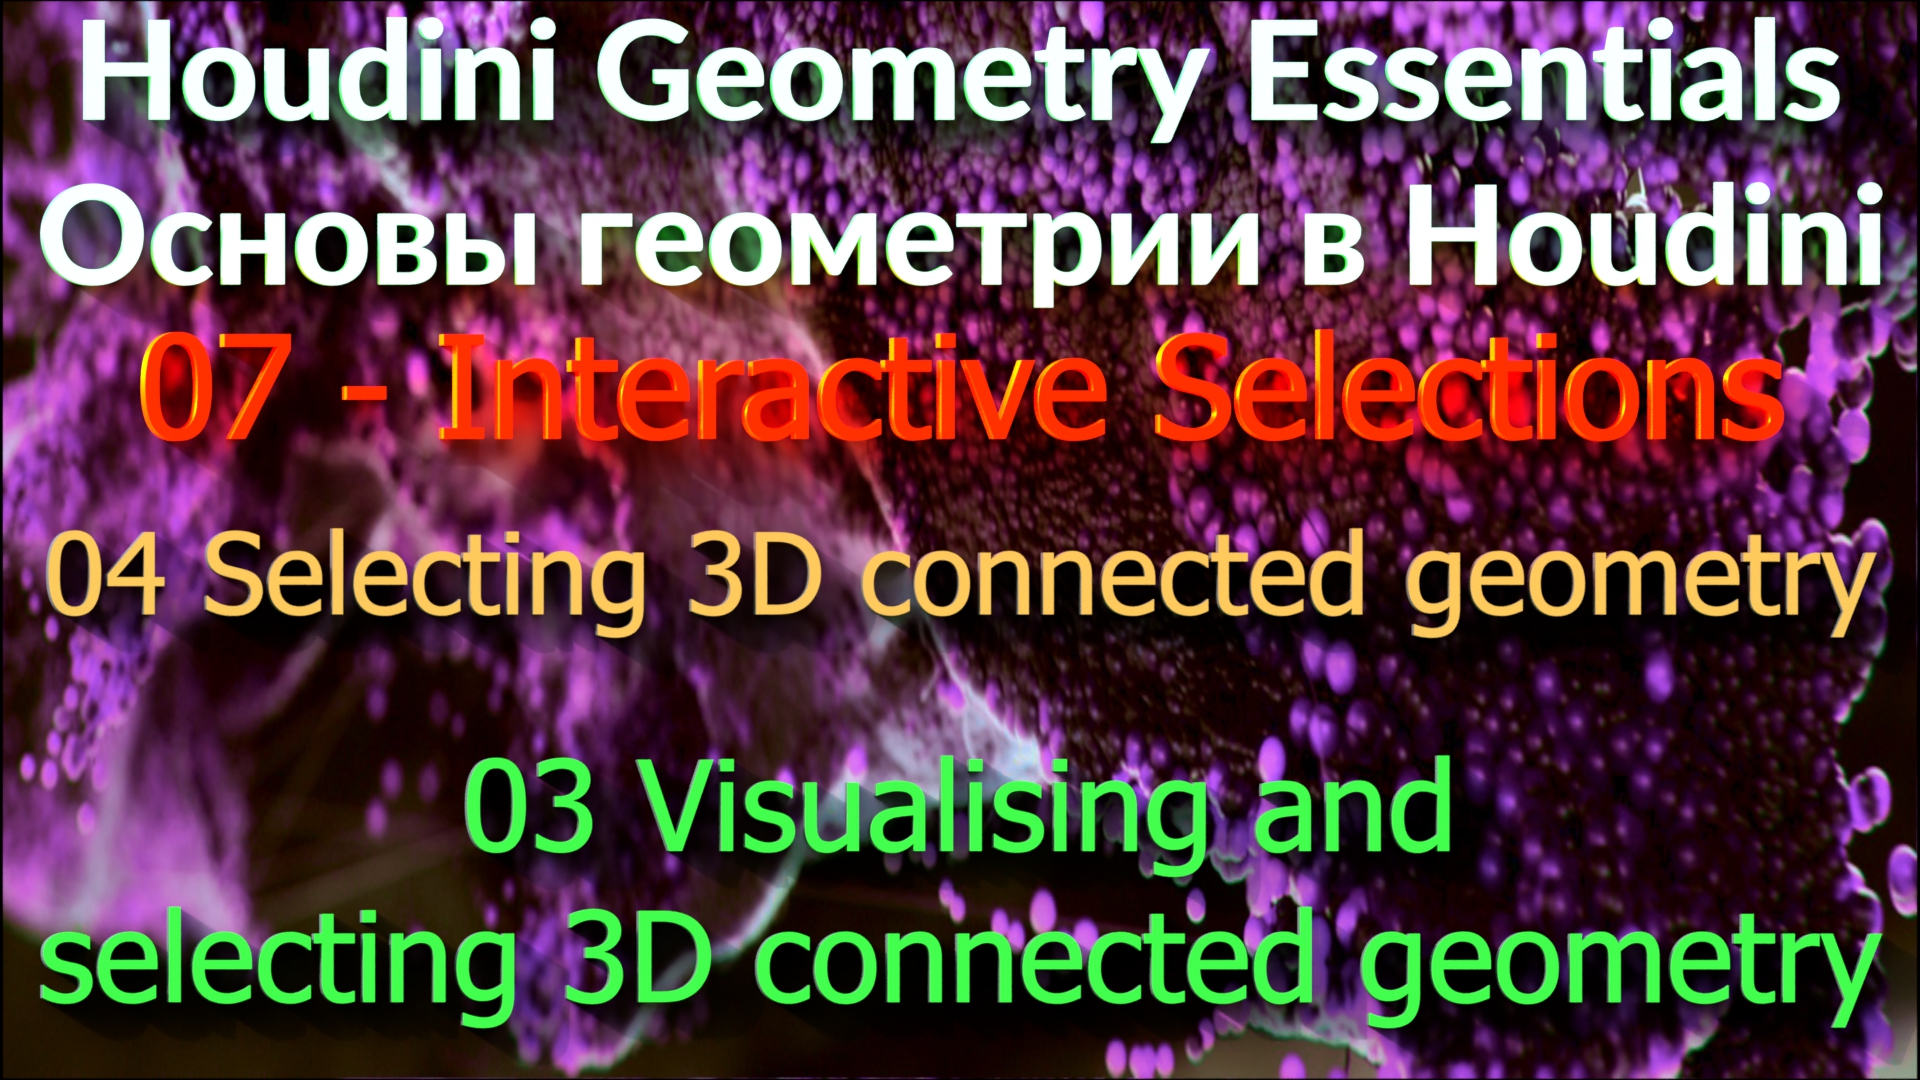 07_04_03 Visualising and selecting 3D connected geometry